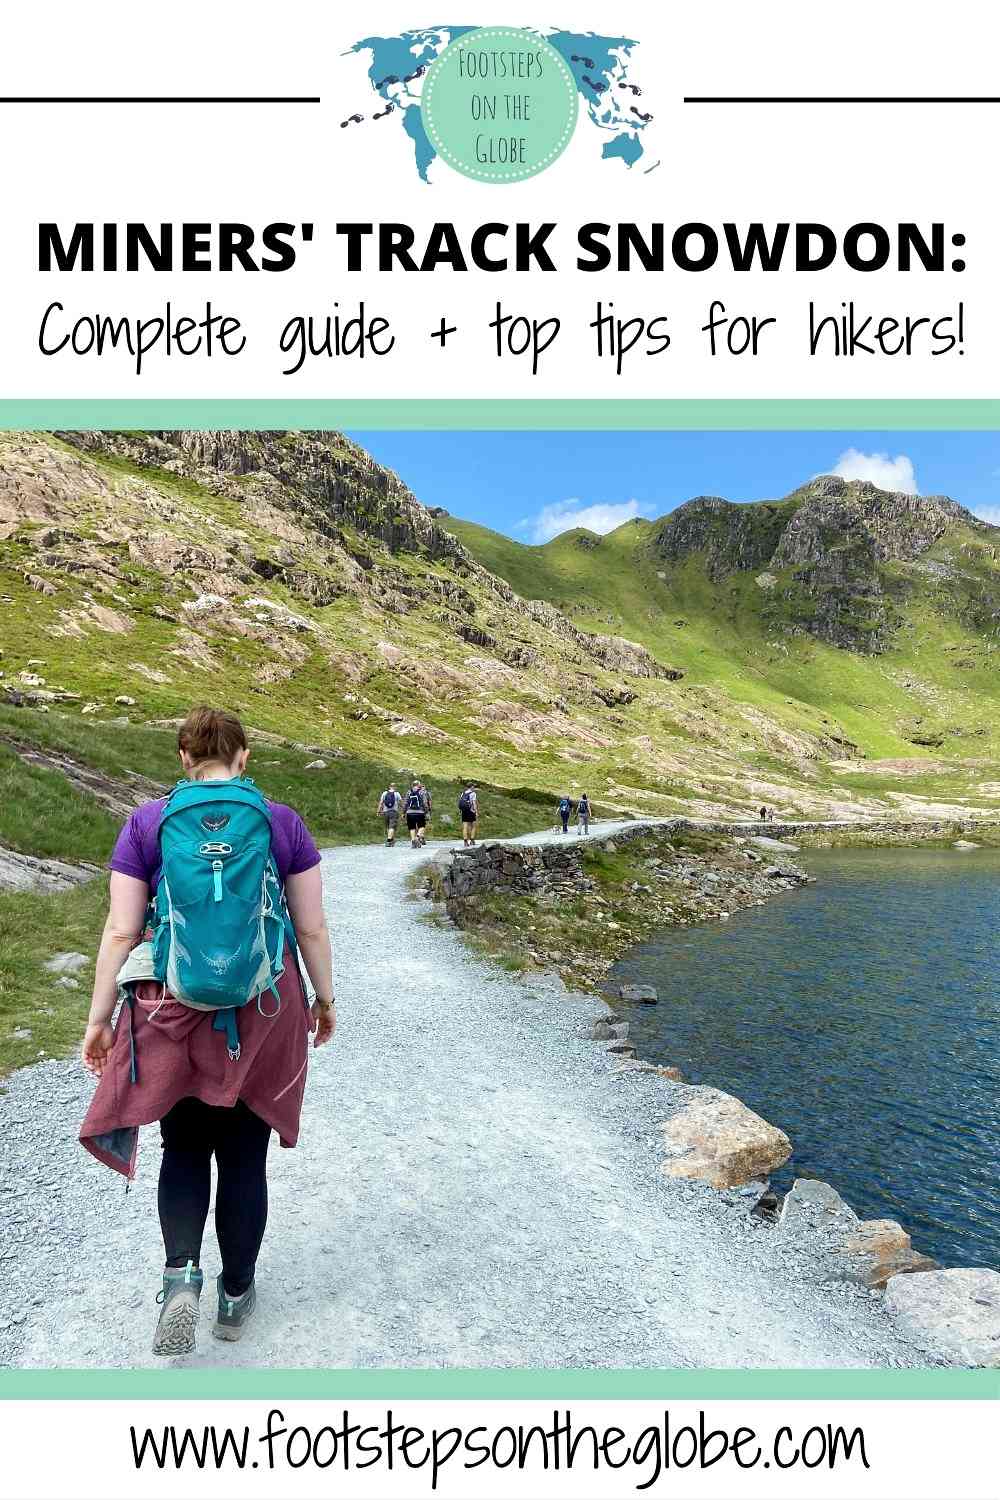 Pinterest image of hiker walking along the Miners Track next to a lake with green peaks in the background on the way back from the summit of Snowdon with the text: "MINERS TRACK SNOWDON: Complete guide + top tips for hikers!" 